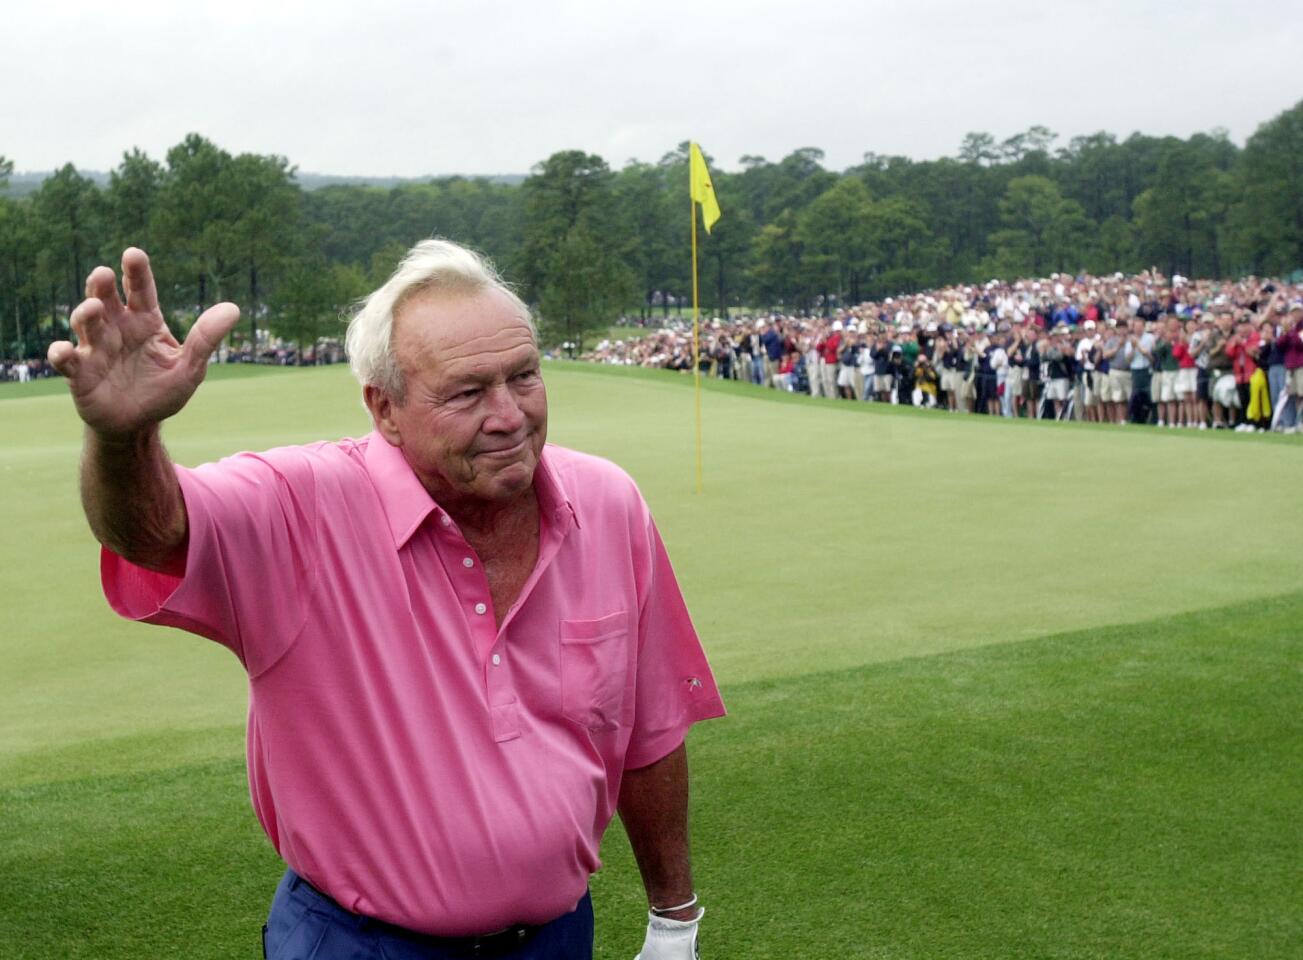 Arnold Palmer waves to the gallery as he completes his last competitive round in the Masters tournament in 2002.